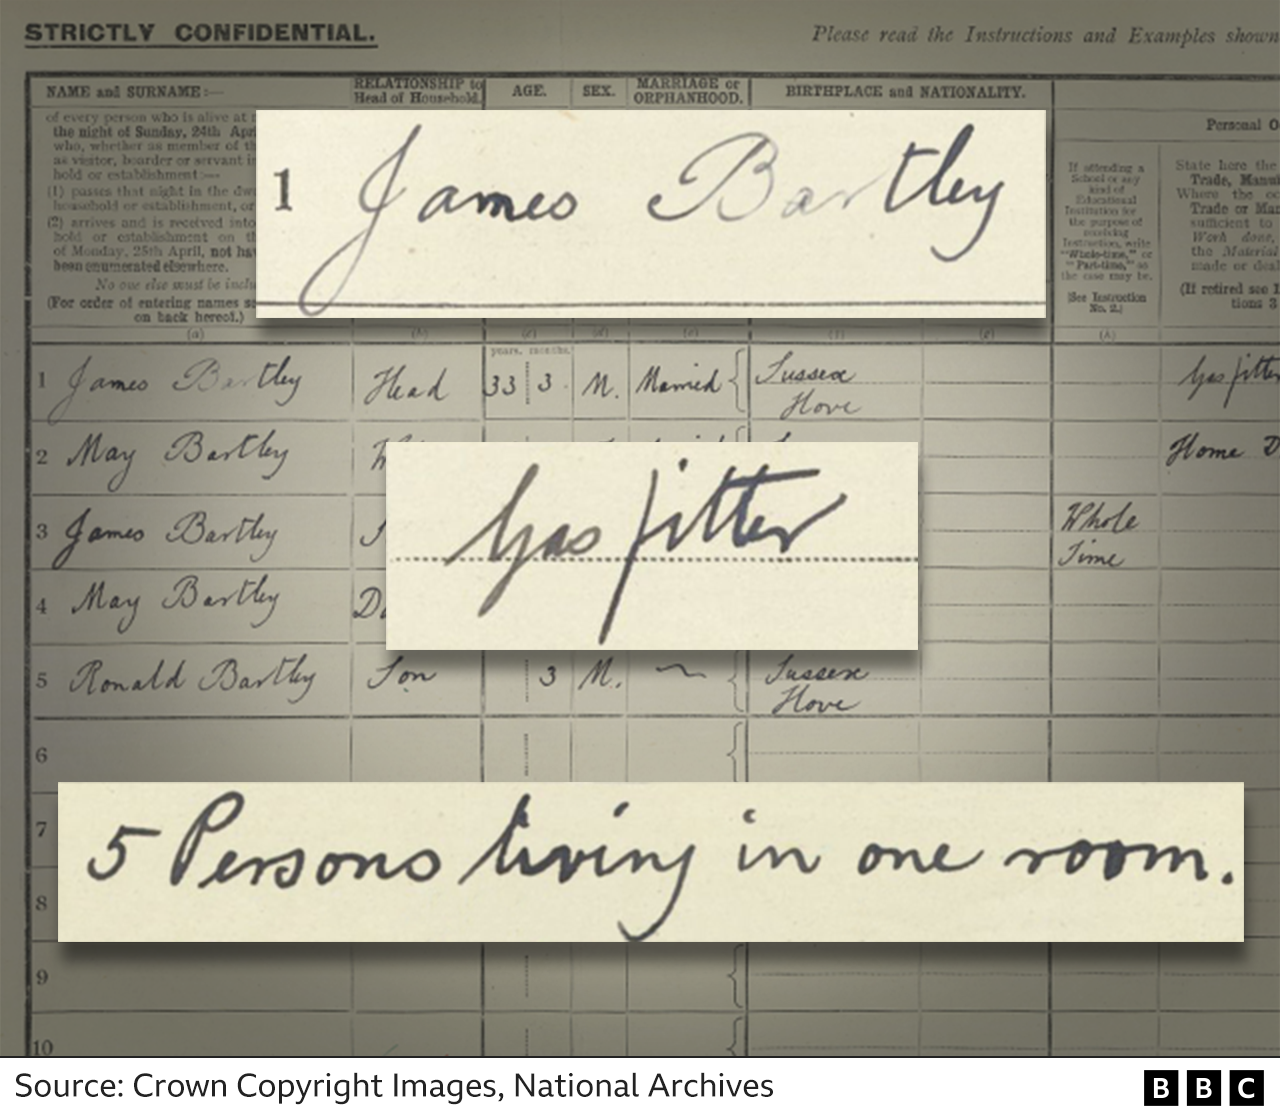 Extracts from James Bartley's 1921 Census form